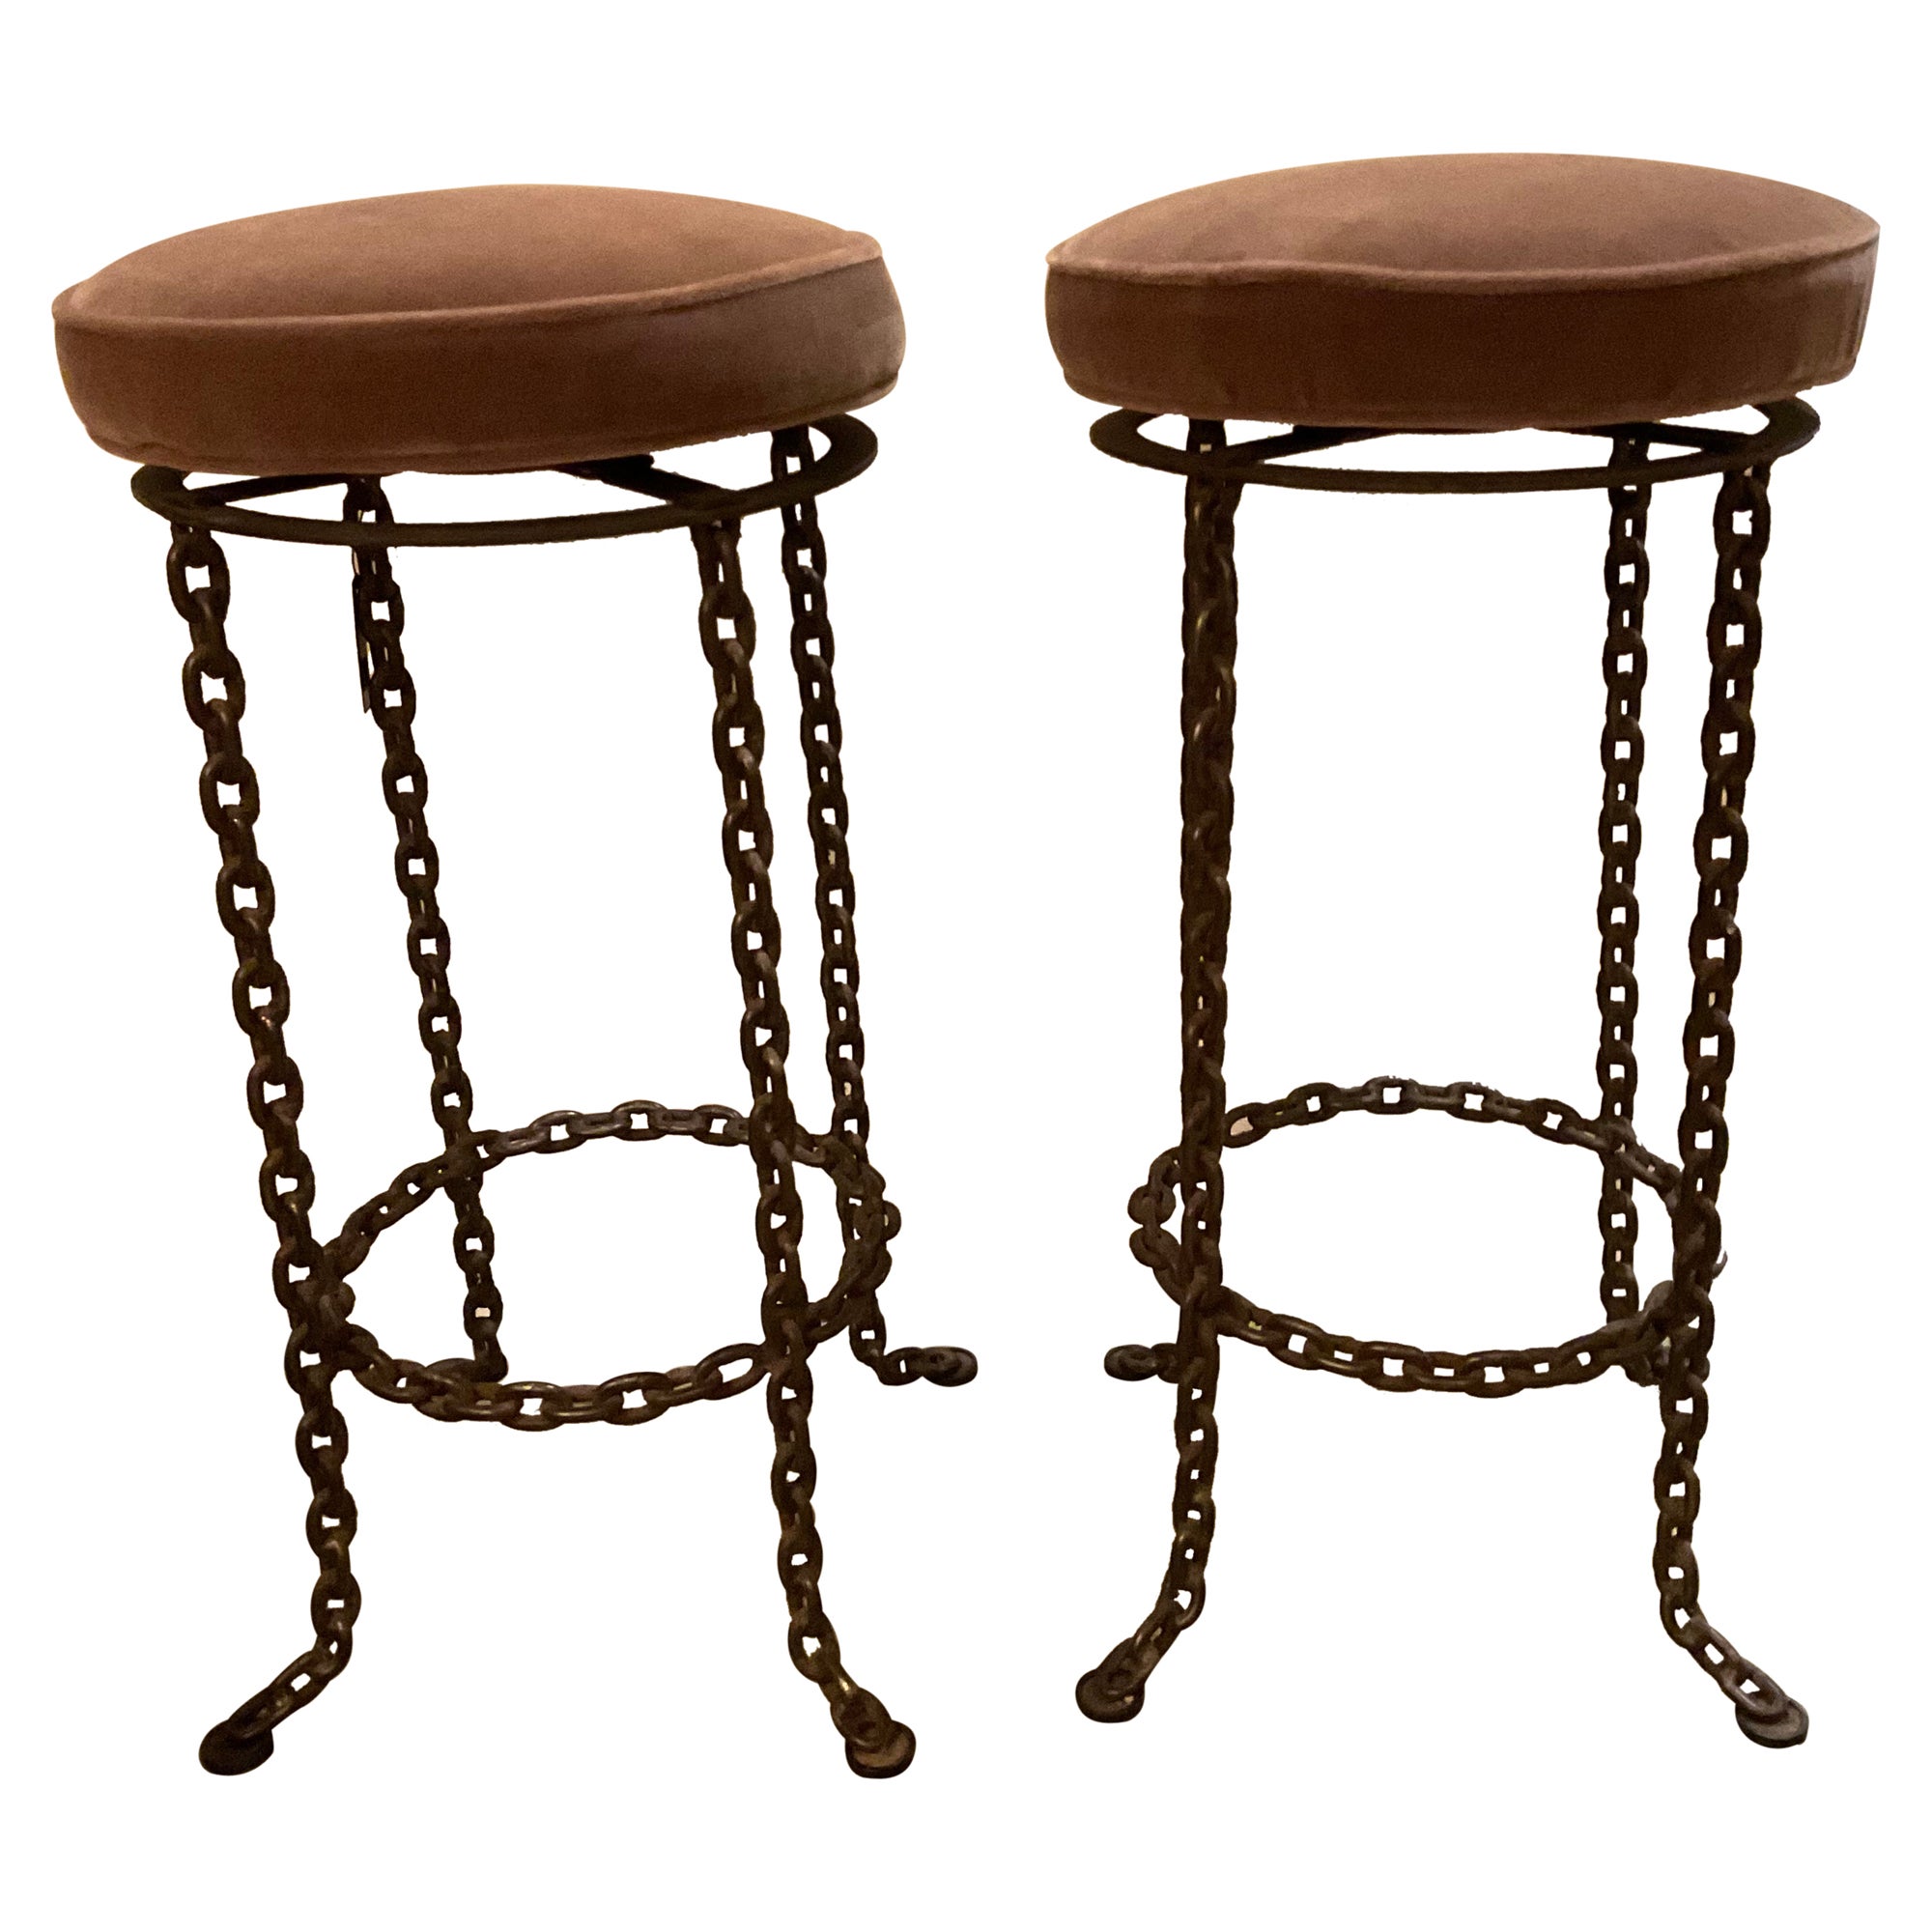 Pair of Chain Link Swivel Seat Barstools